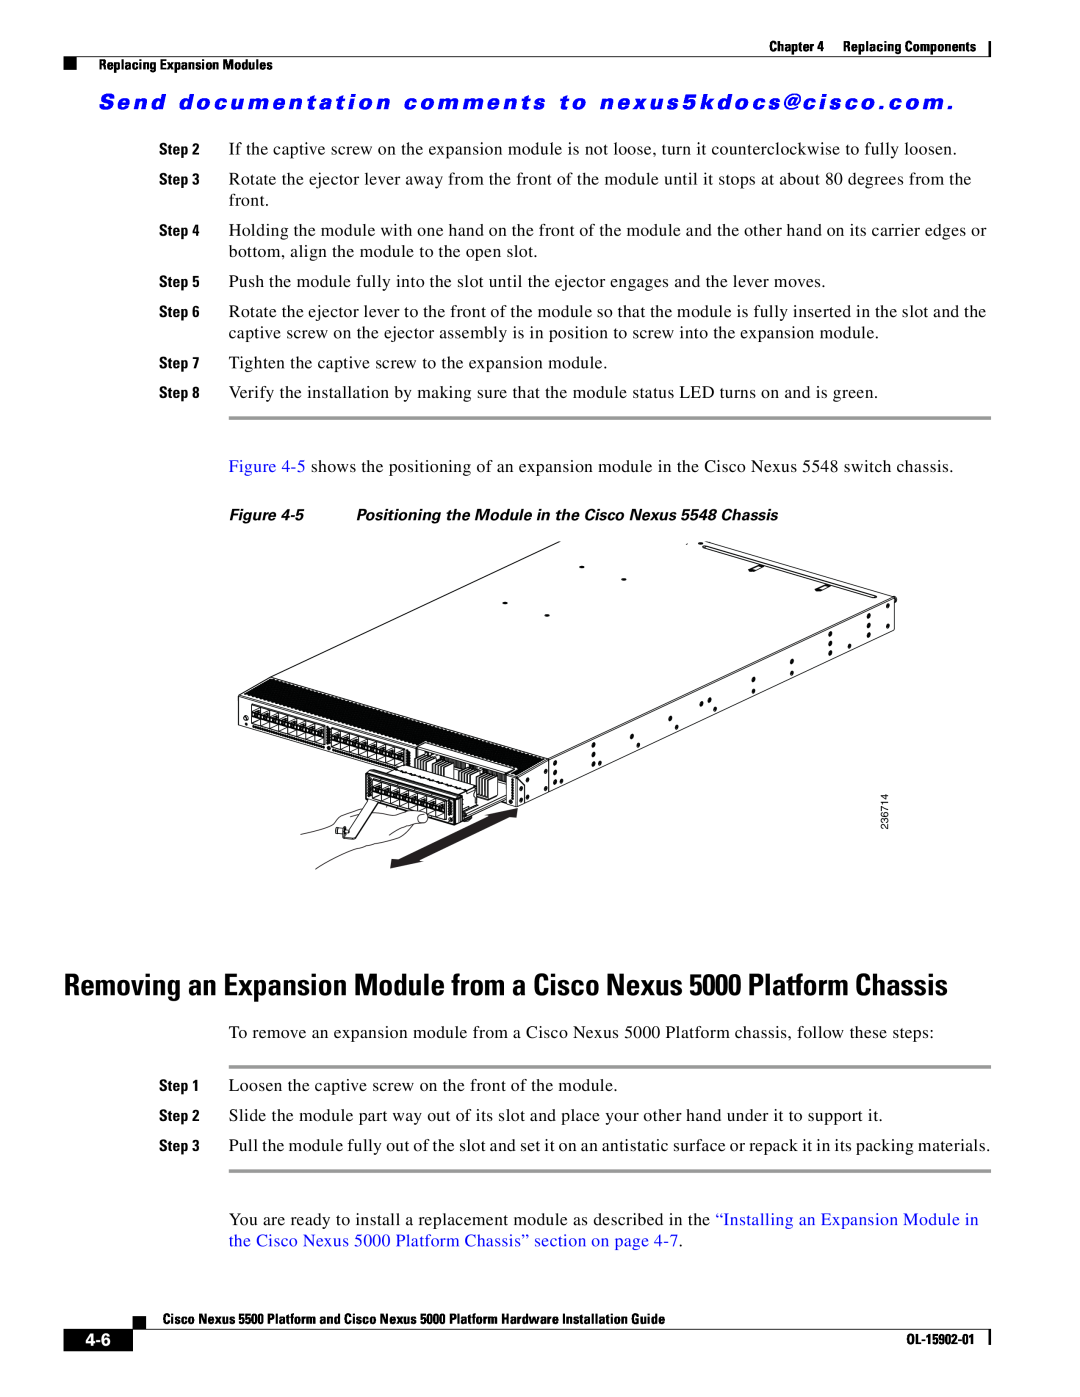 Cisco Systems manual Removing an Expansion Module from a Cisco Nexus 5000 Platform Chassis 